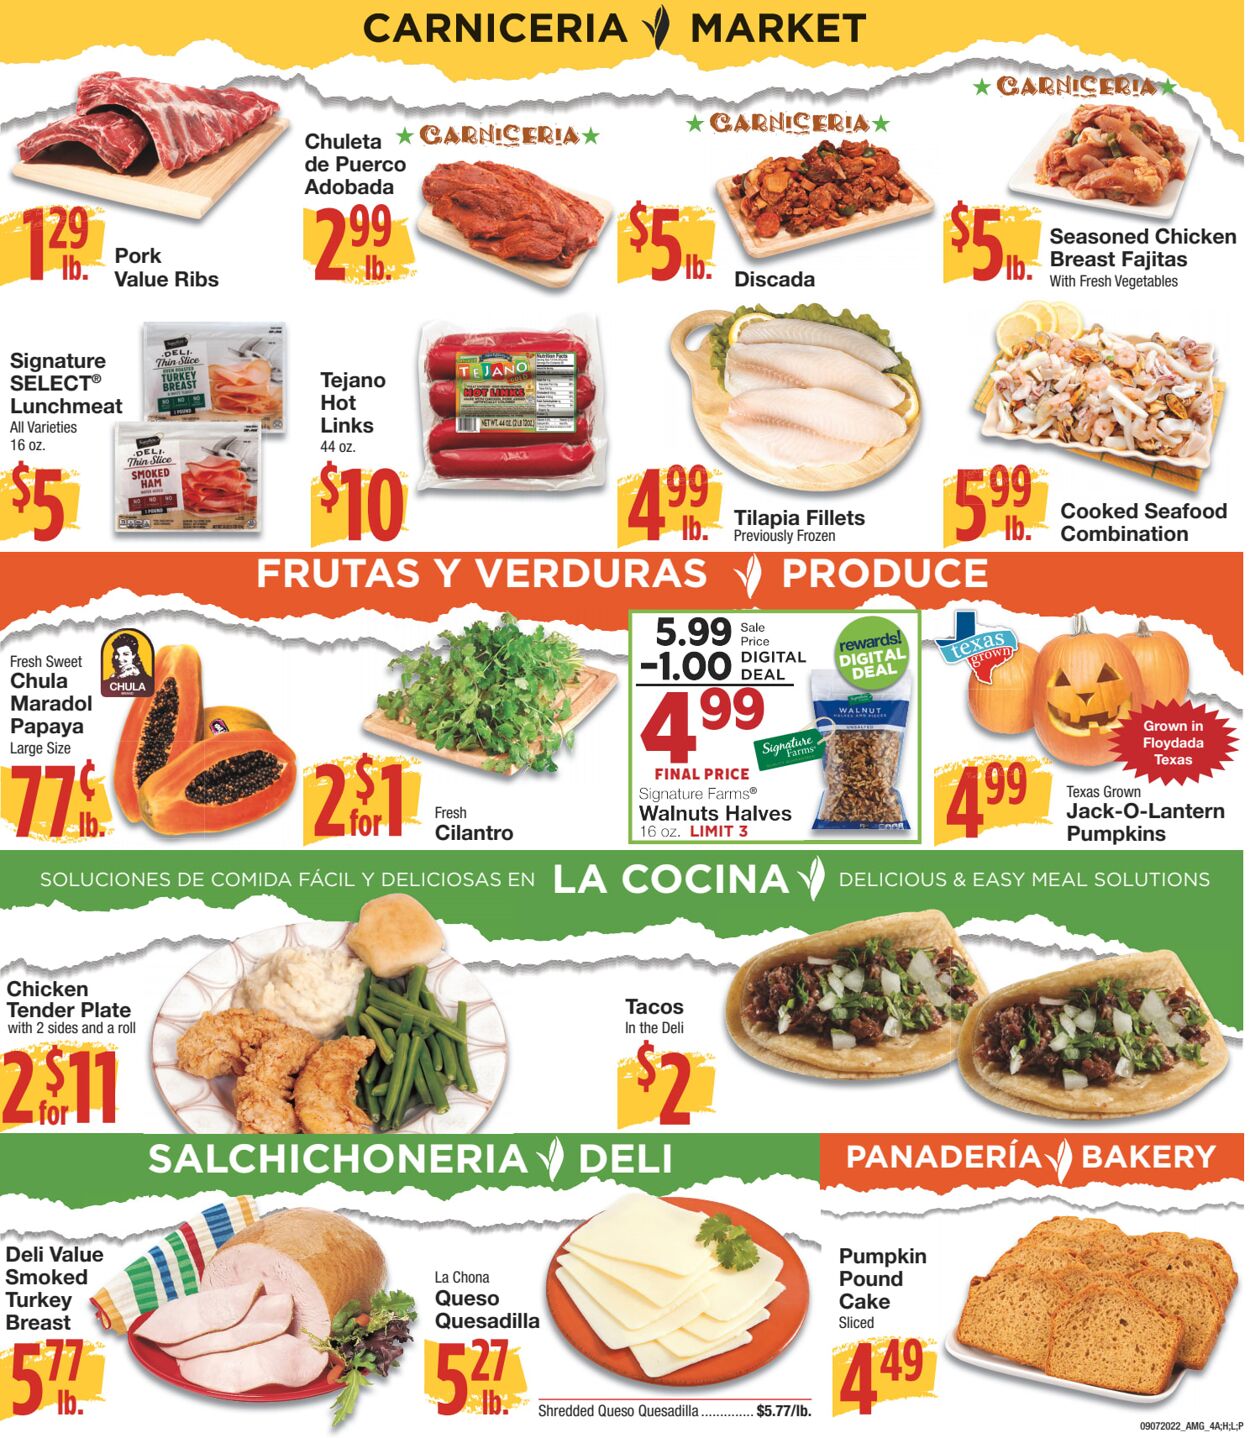 Weekly ad United Supermarkets 09/07/2022 - 09/13/2022